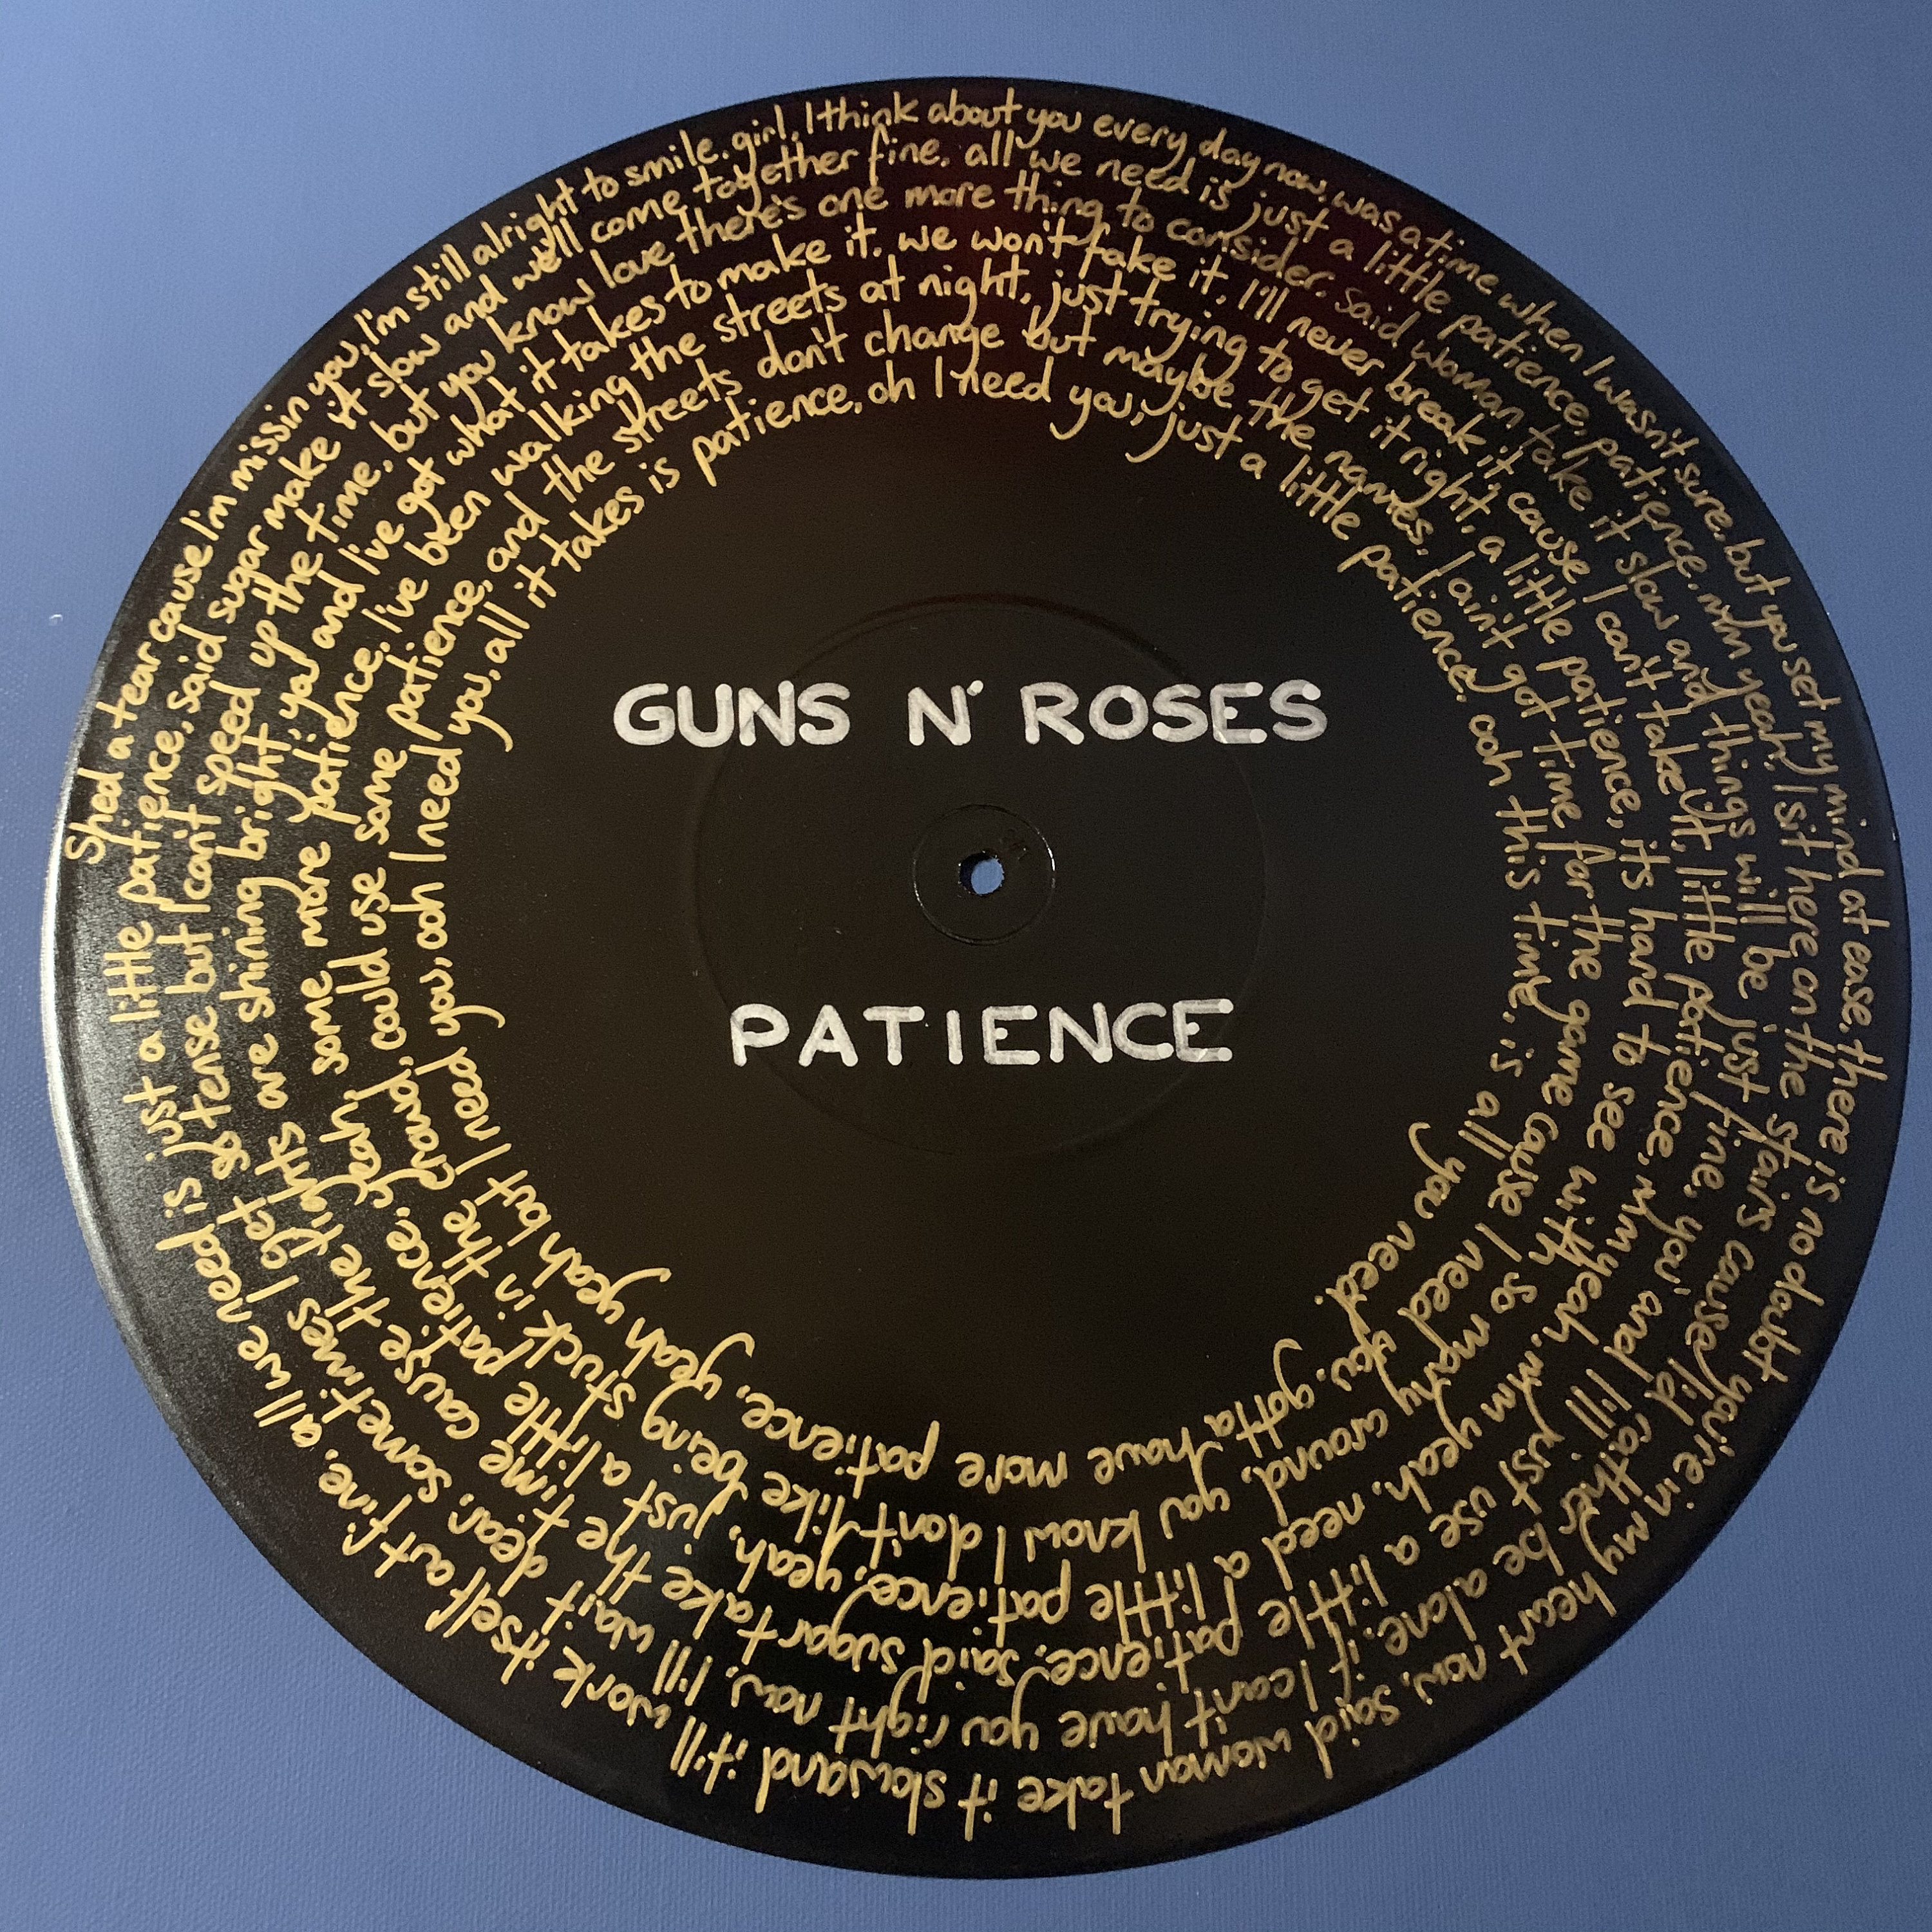 Patience - song and lyrics by Guns N' Roses